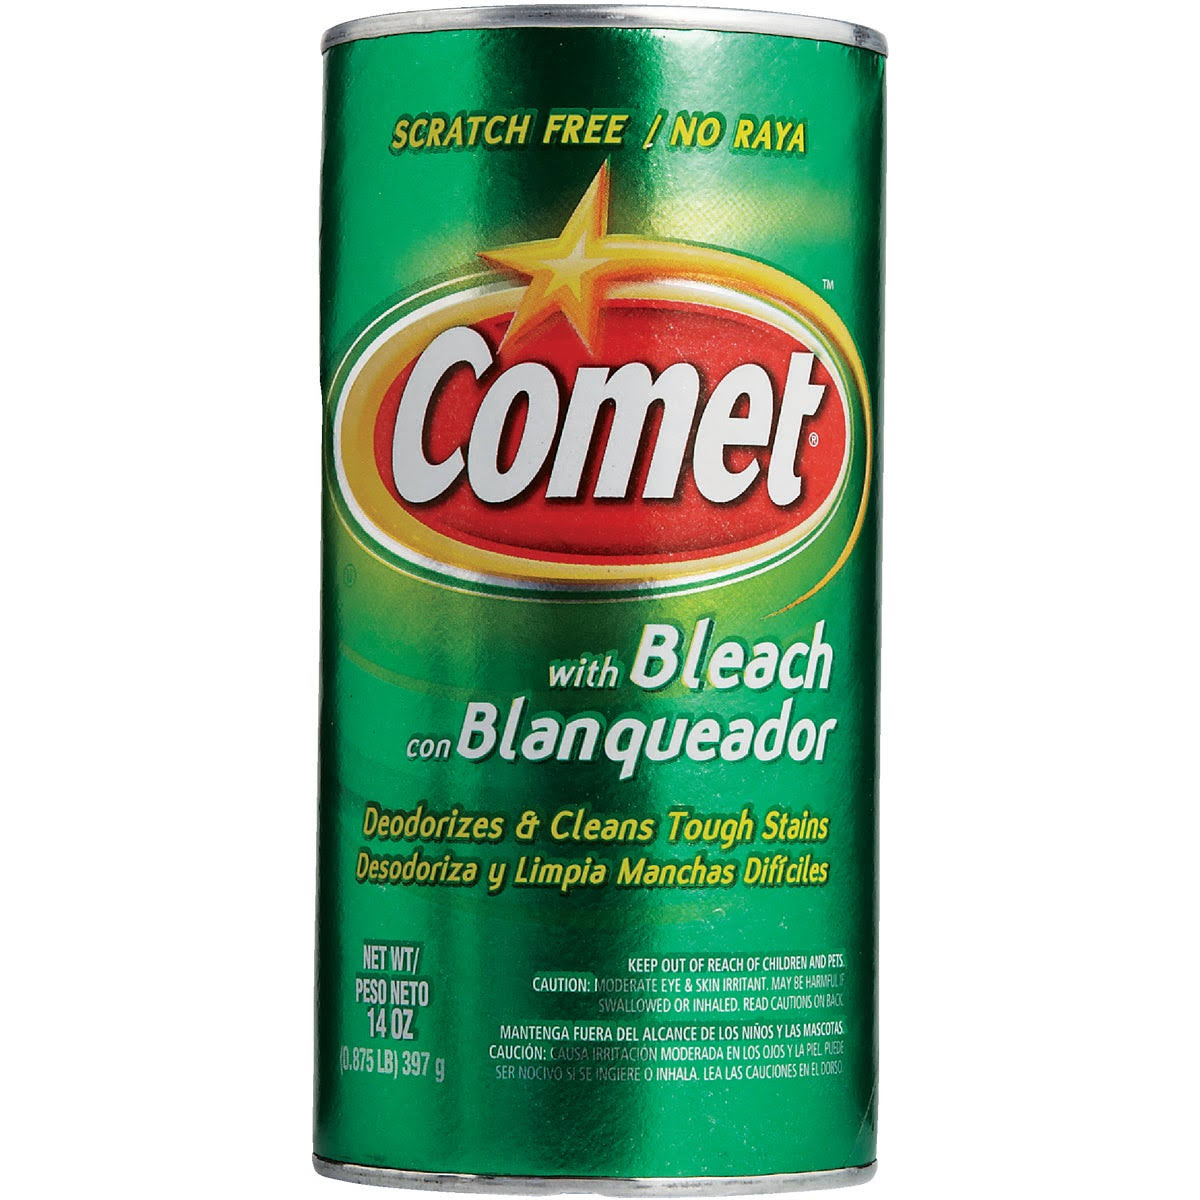 Comet 14 Oz. Powder Cleaner with Bleach 85749608821